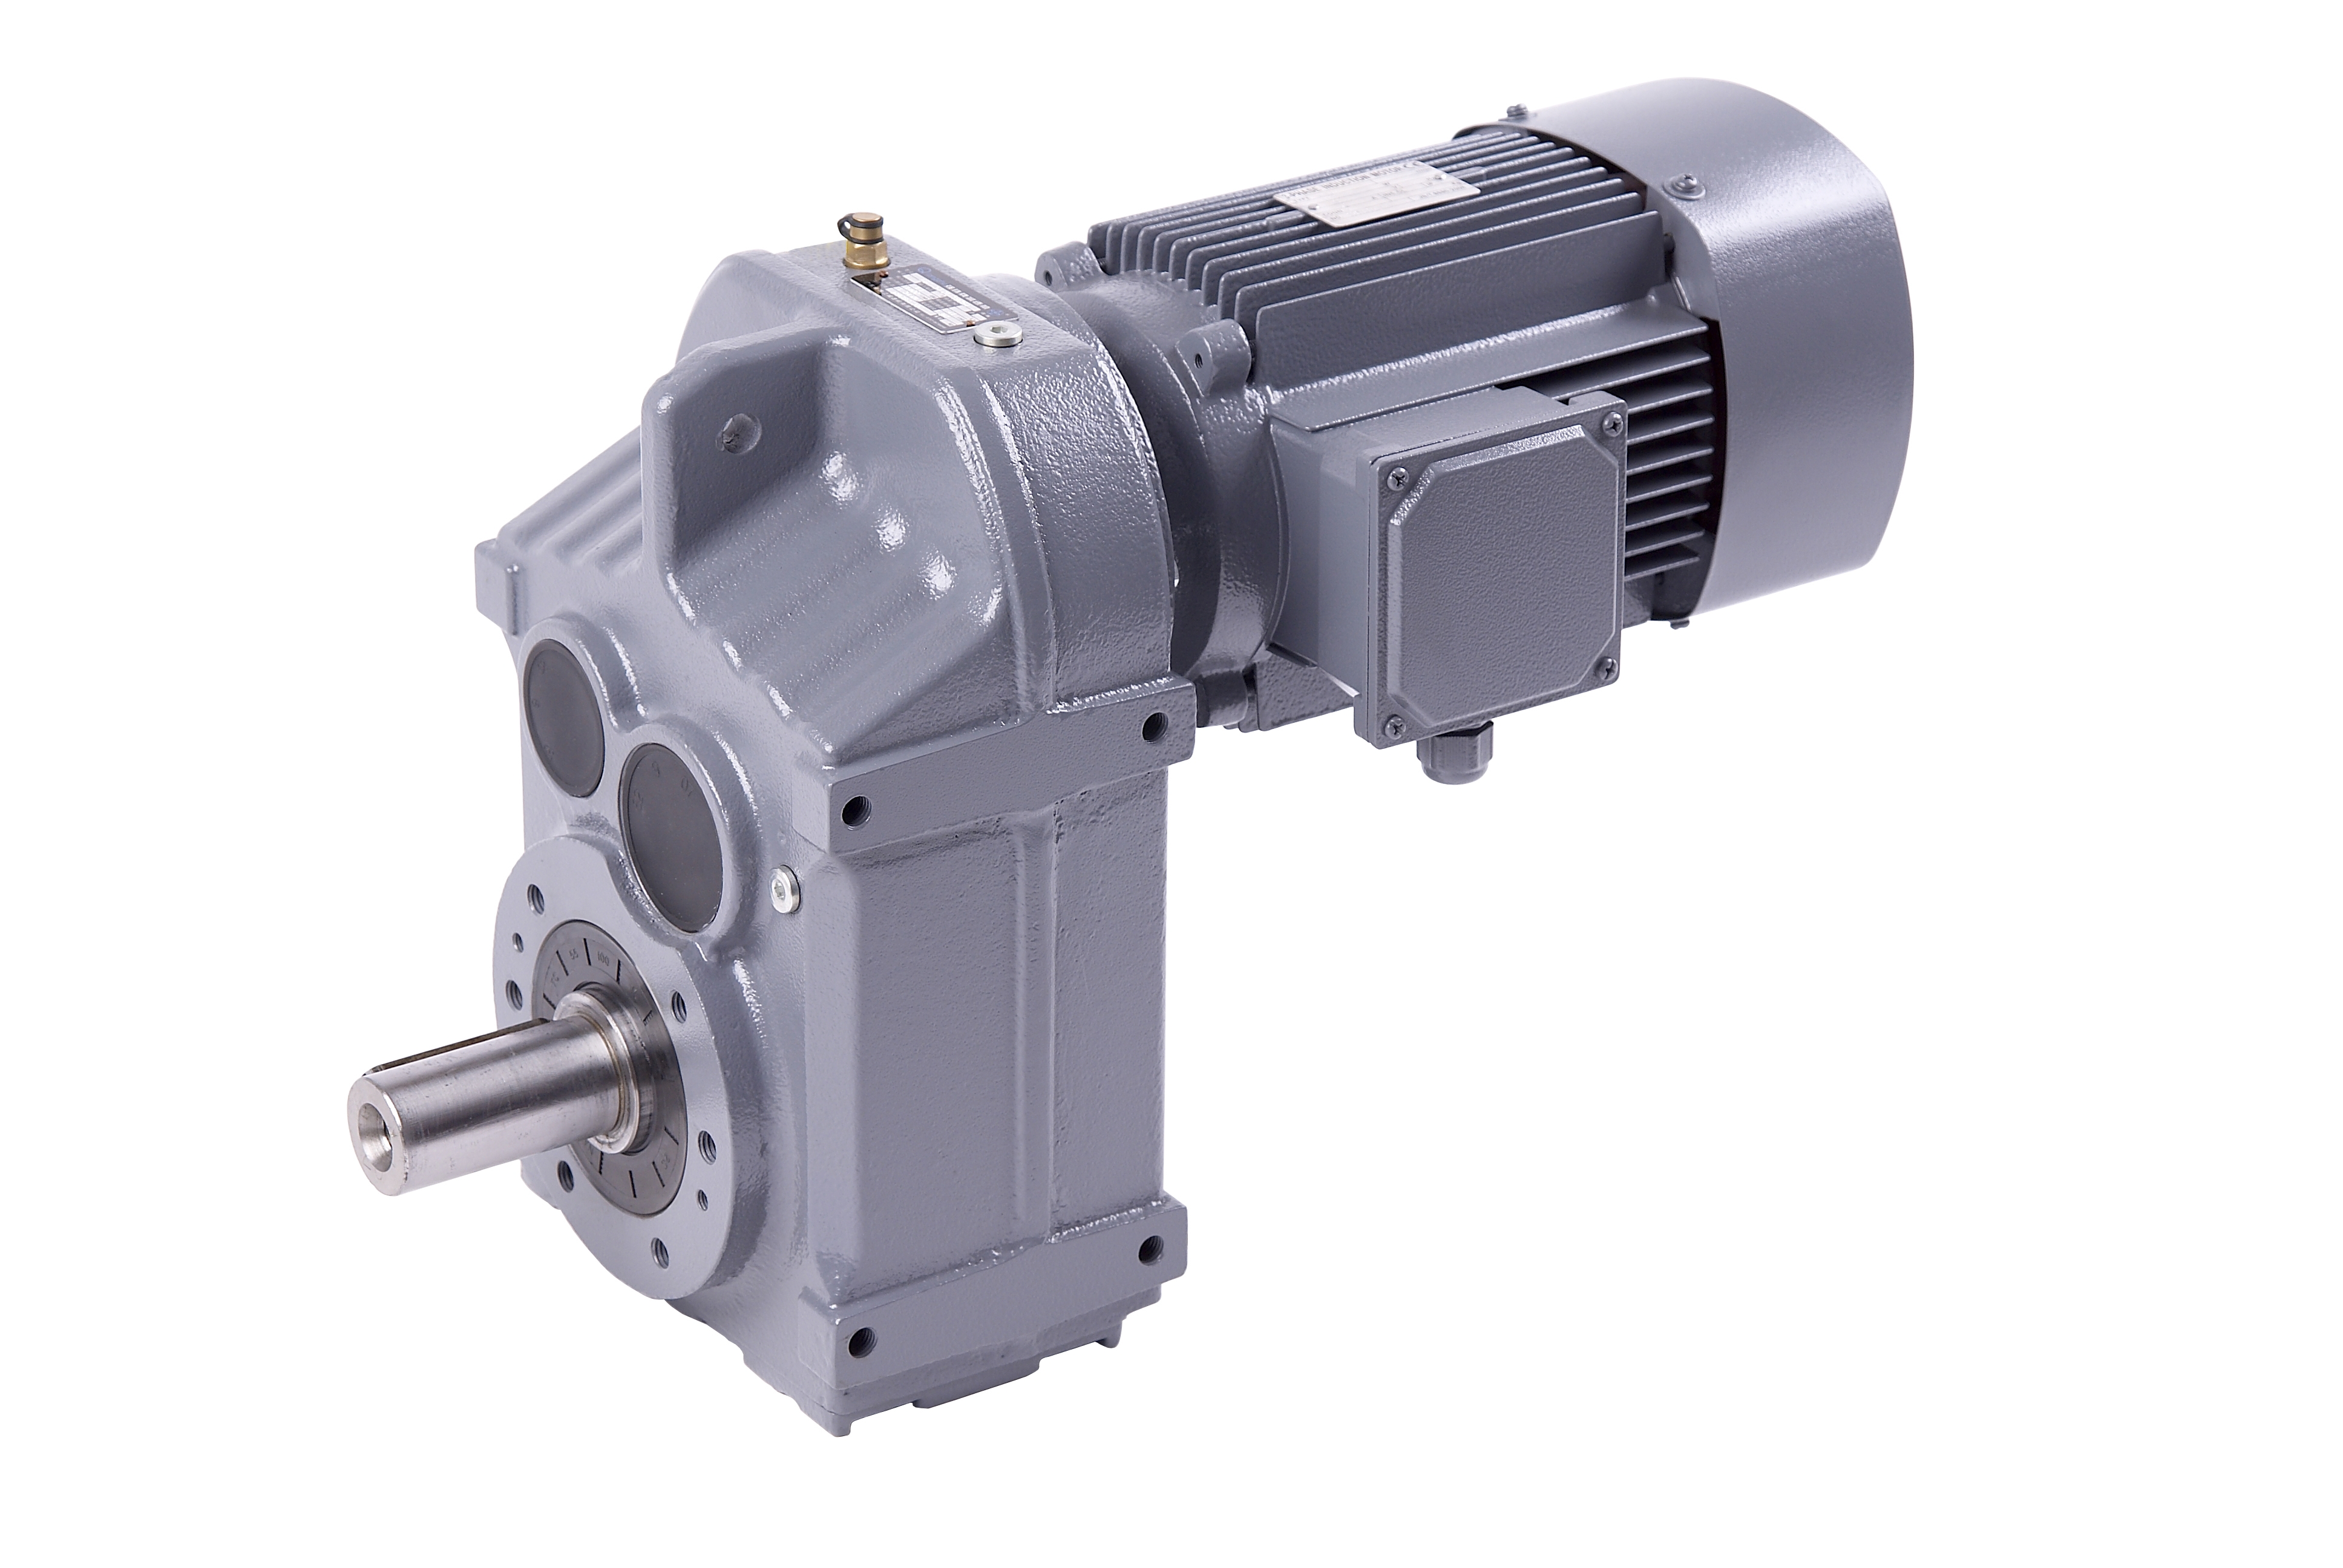 function of parallel precision helical gearbox